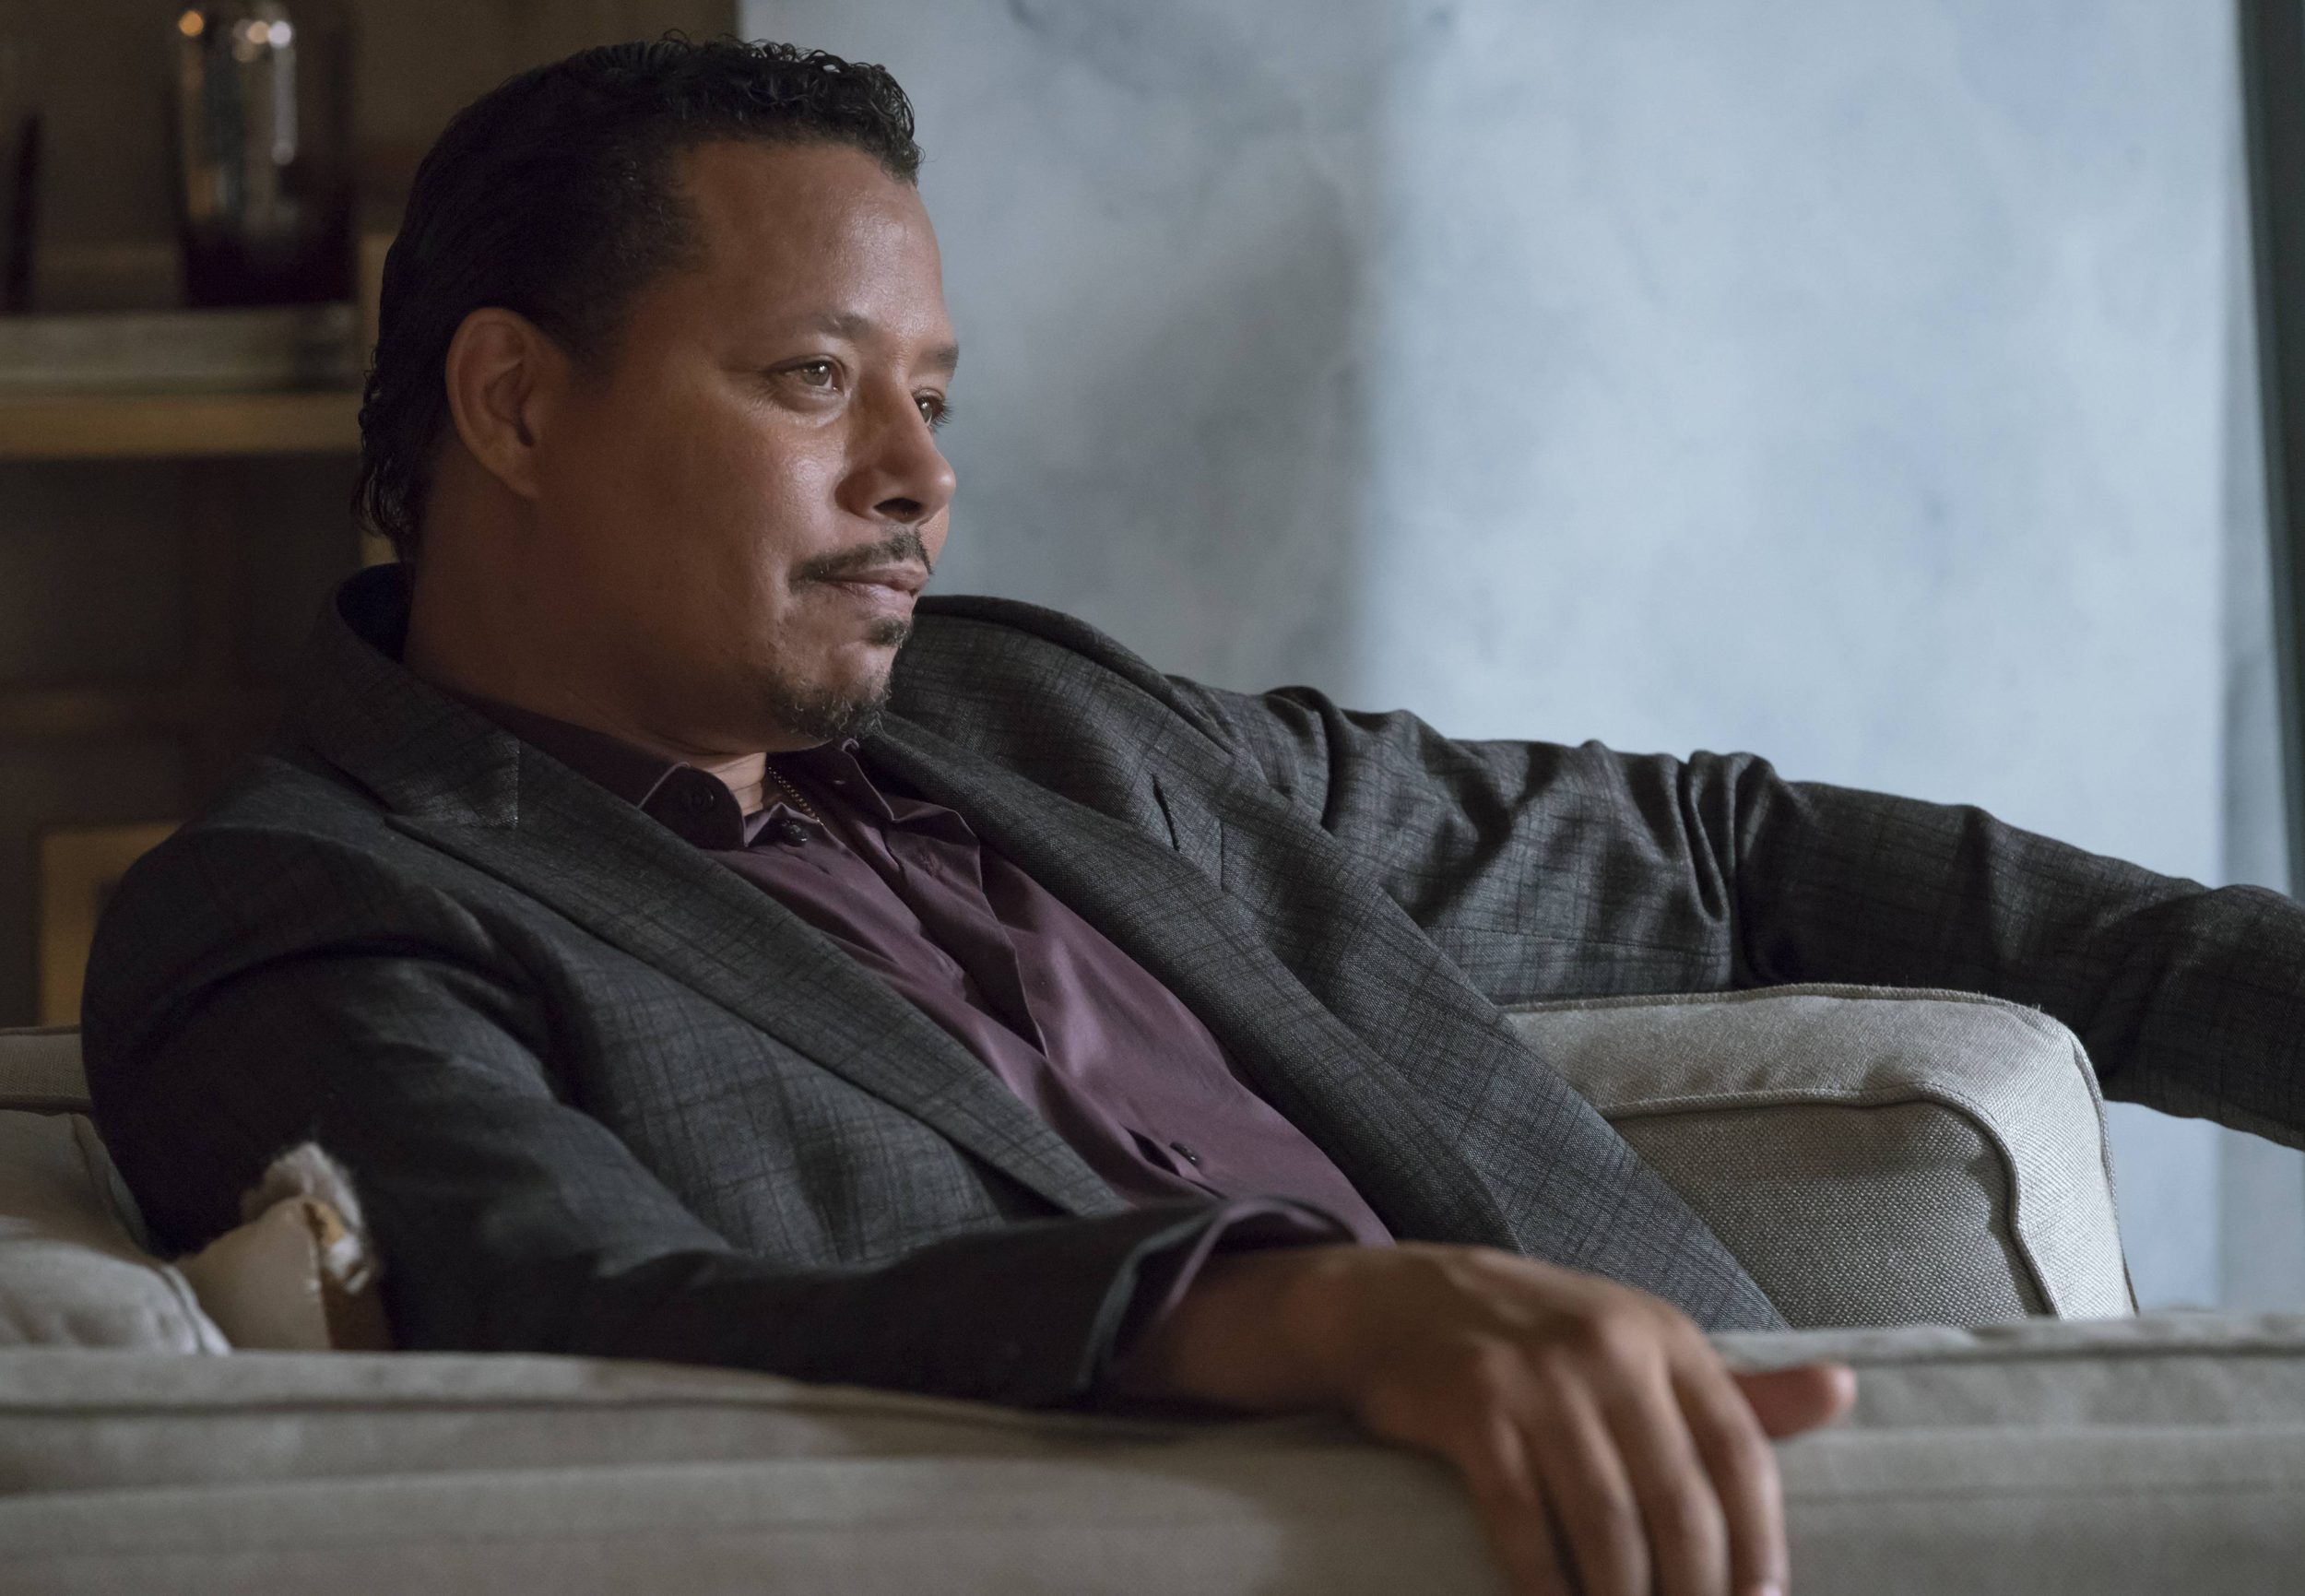 EMPIRE: Terrence Howard in the "The Unkindest Cut" episode of EMPIRE airing Dec. 7 (9:00-10:00 PM ET/PT) on FOX. ©2016 Fox Broadcasting Co. CR: Chuck Hodes/FOX